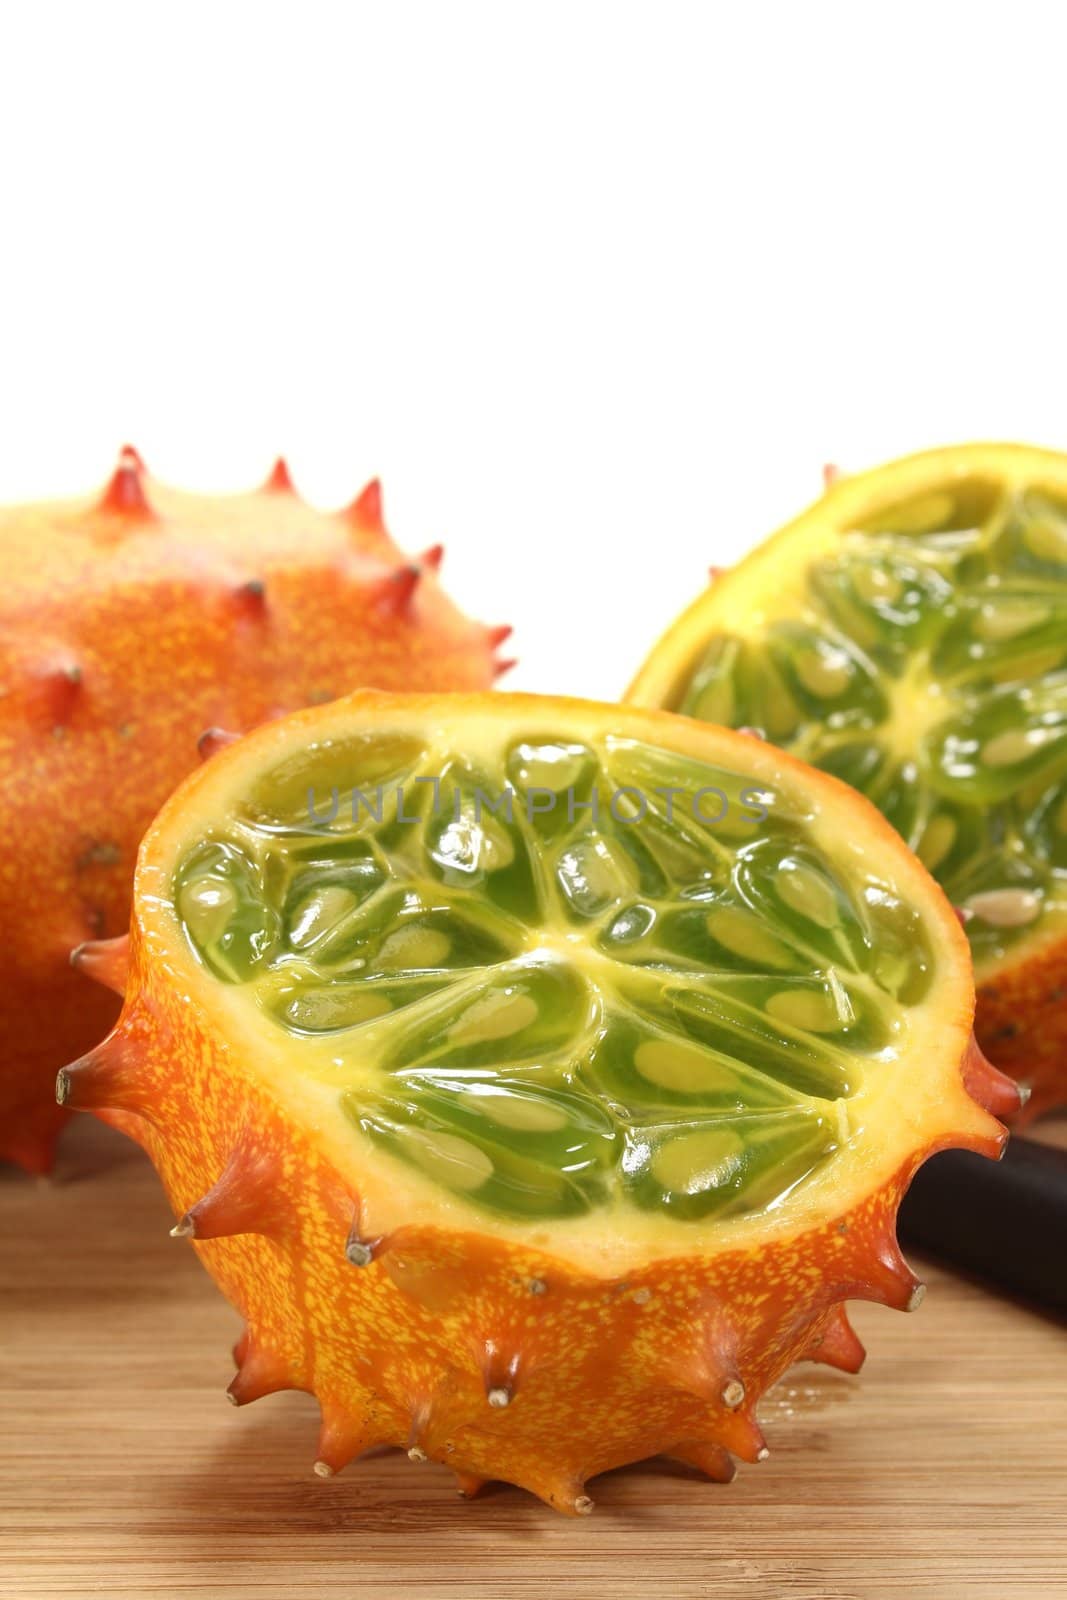 Kiwano on a wooden board by discovery